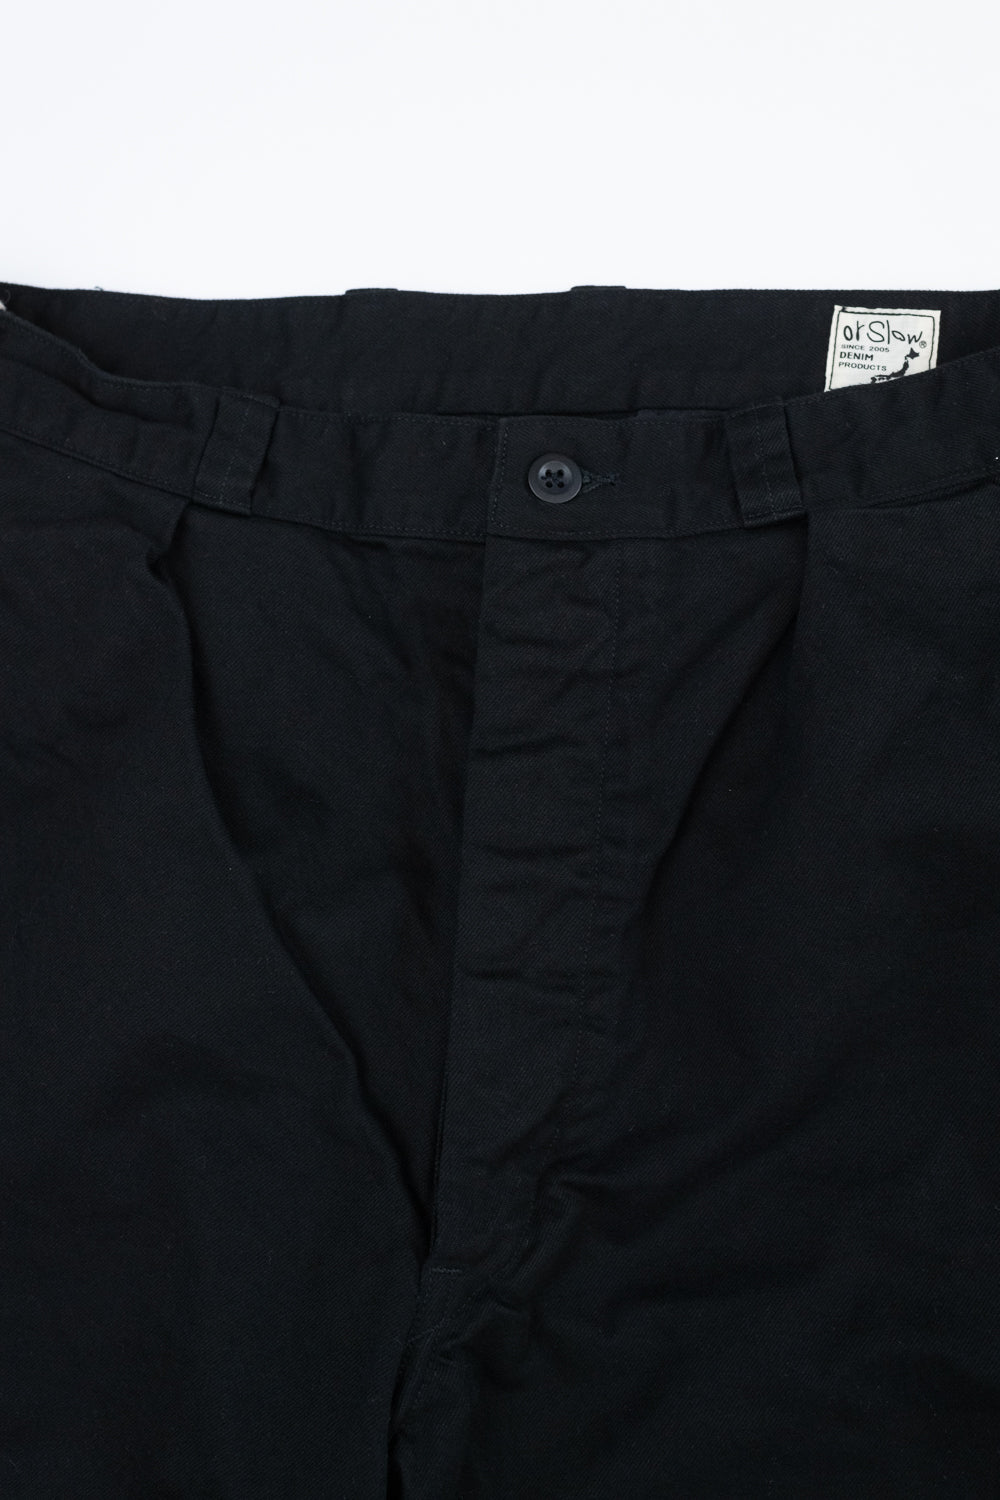 03-5252-61 - M-52 French Army Trouser - Black | James Dant